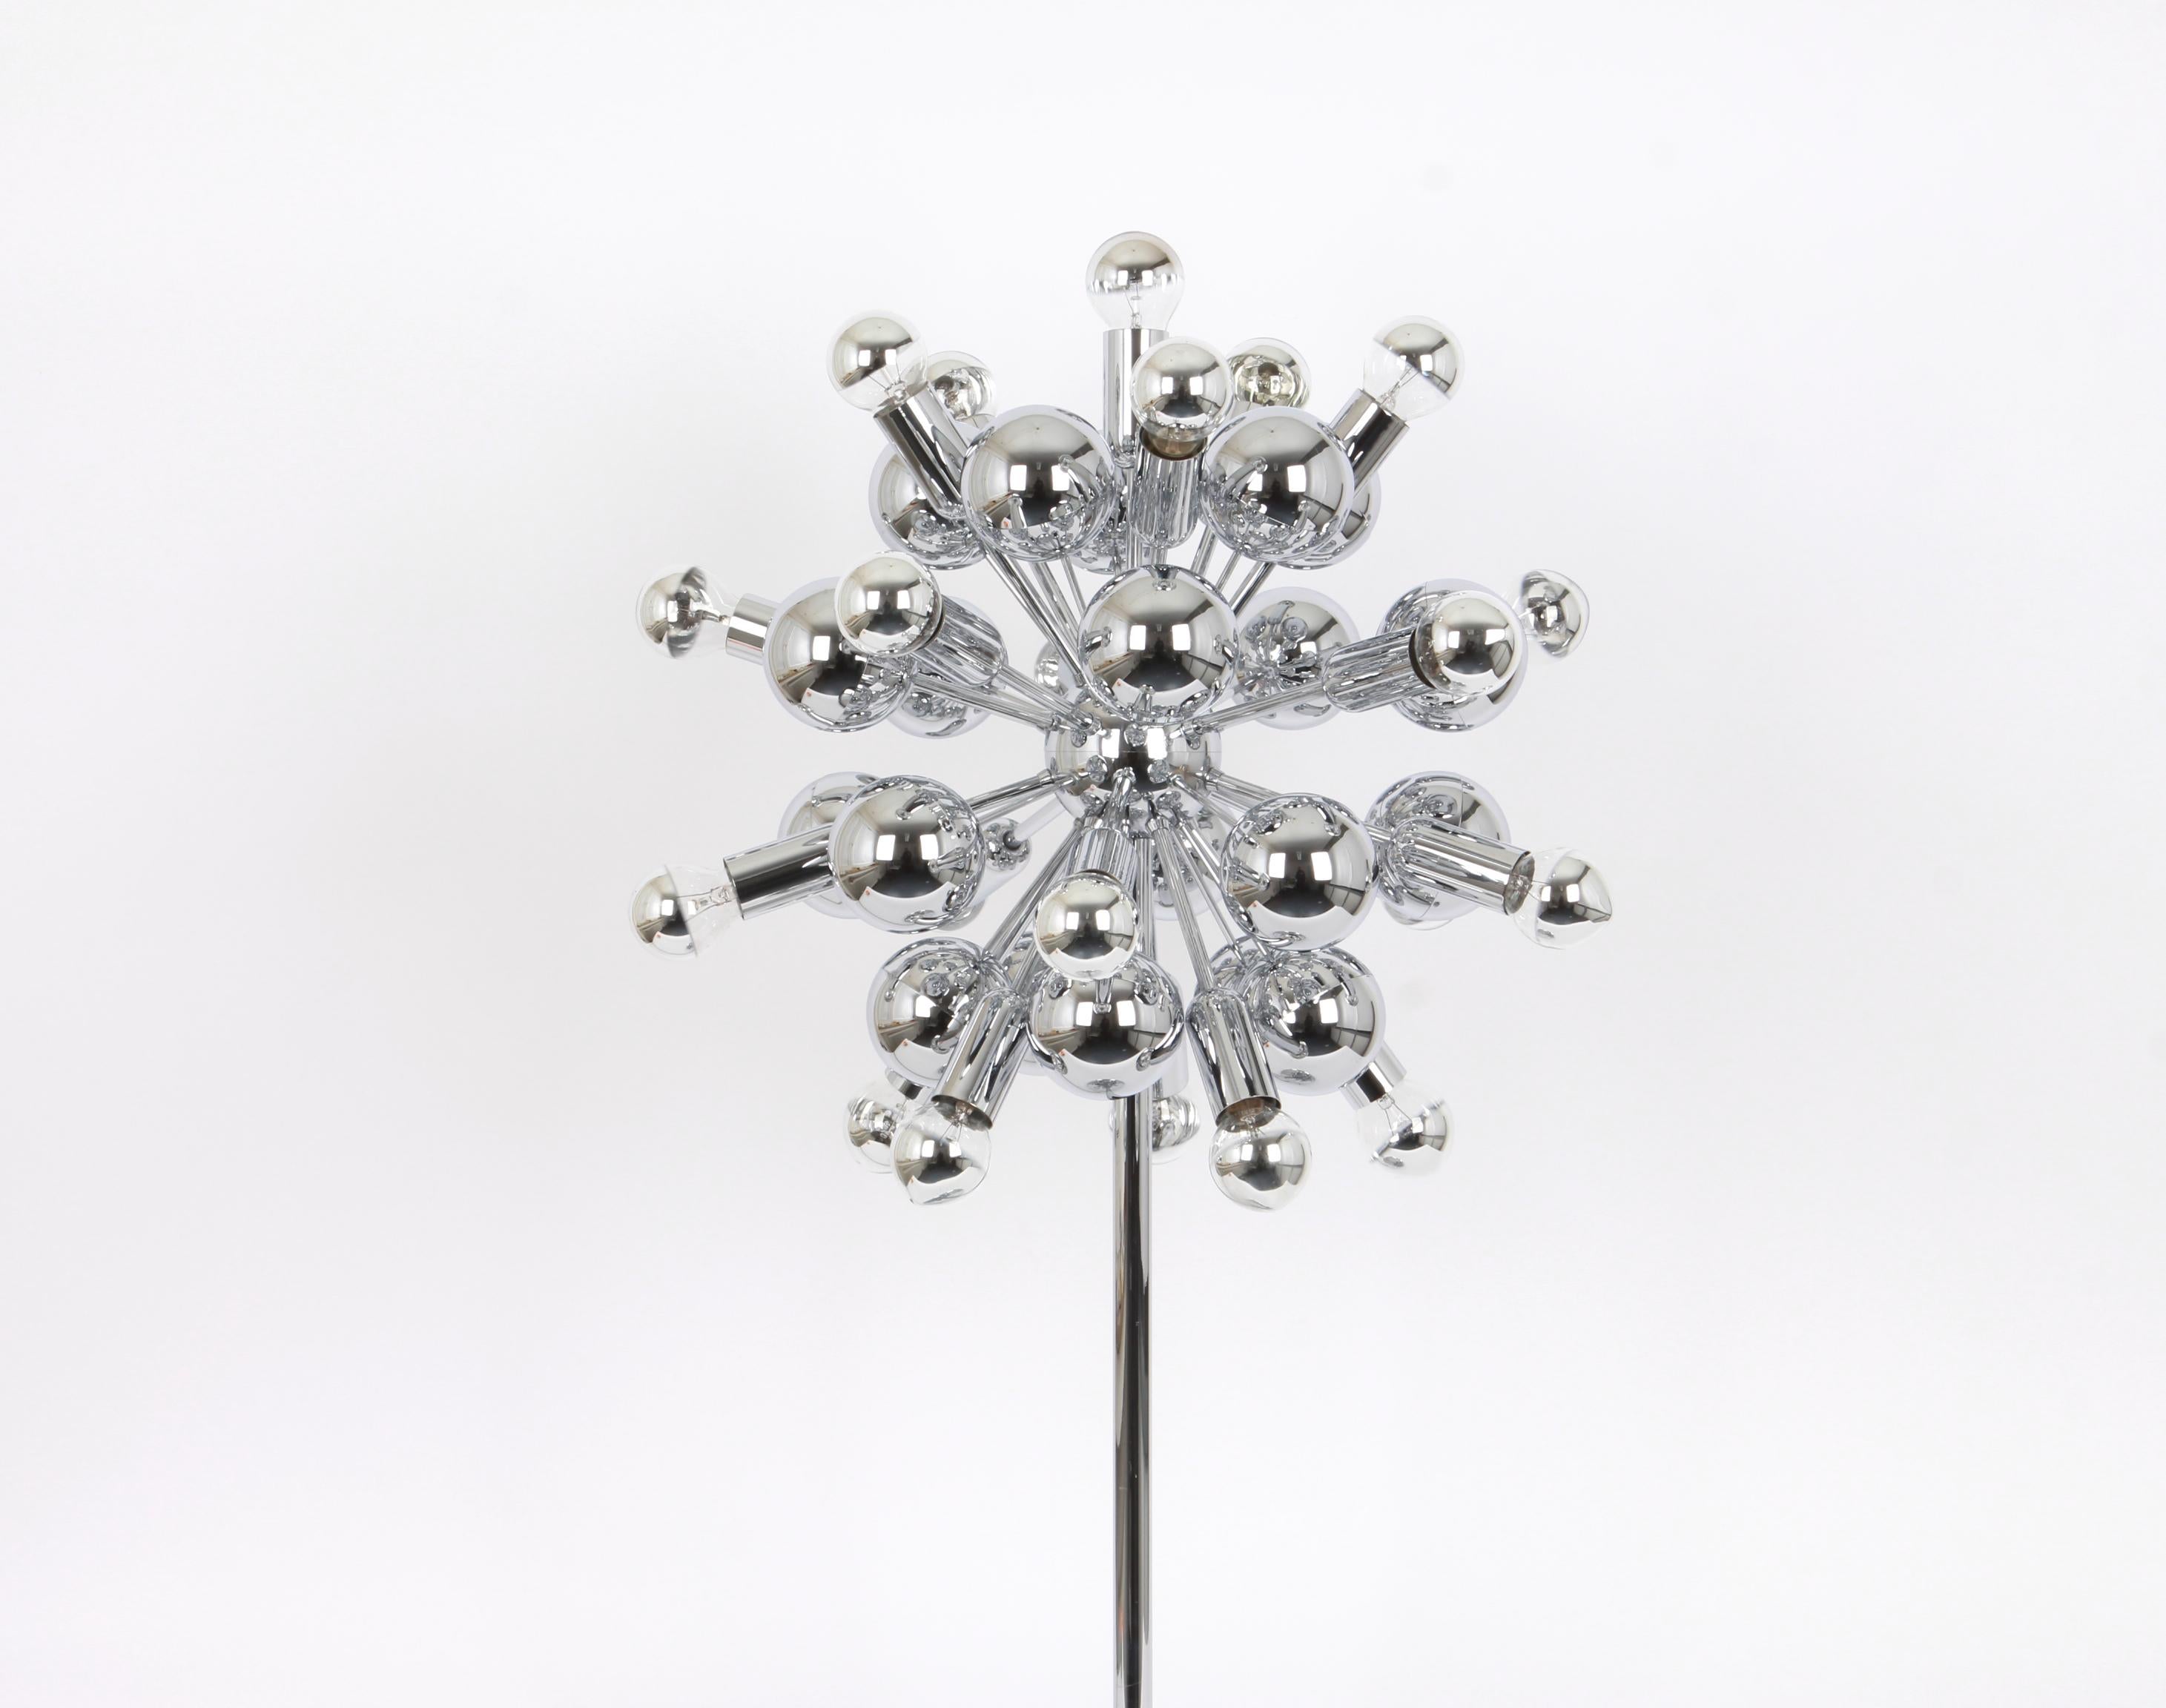 1 of 2 Large Chrome Space Age Sputnik Table Lamps by Cosack, Germany, 1970s For Sale 2